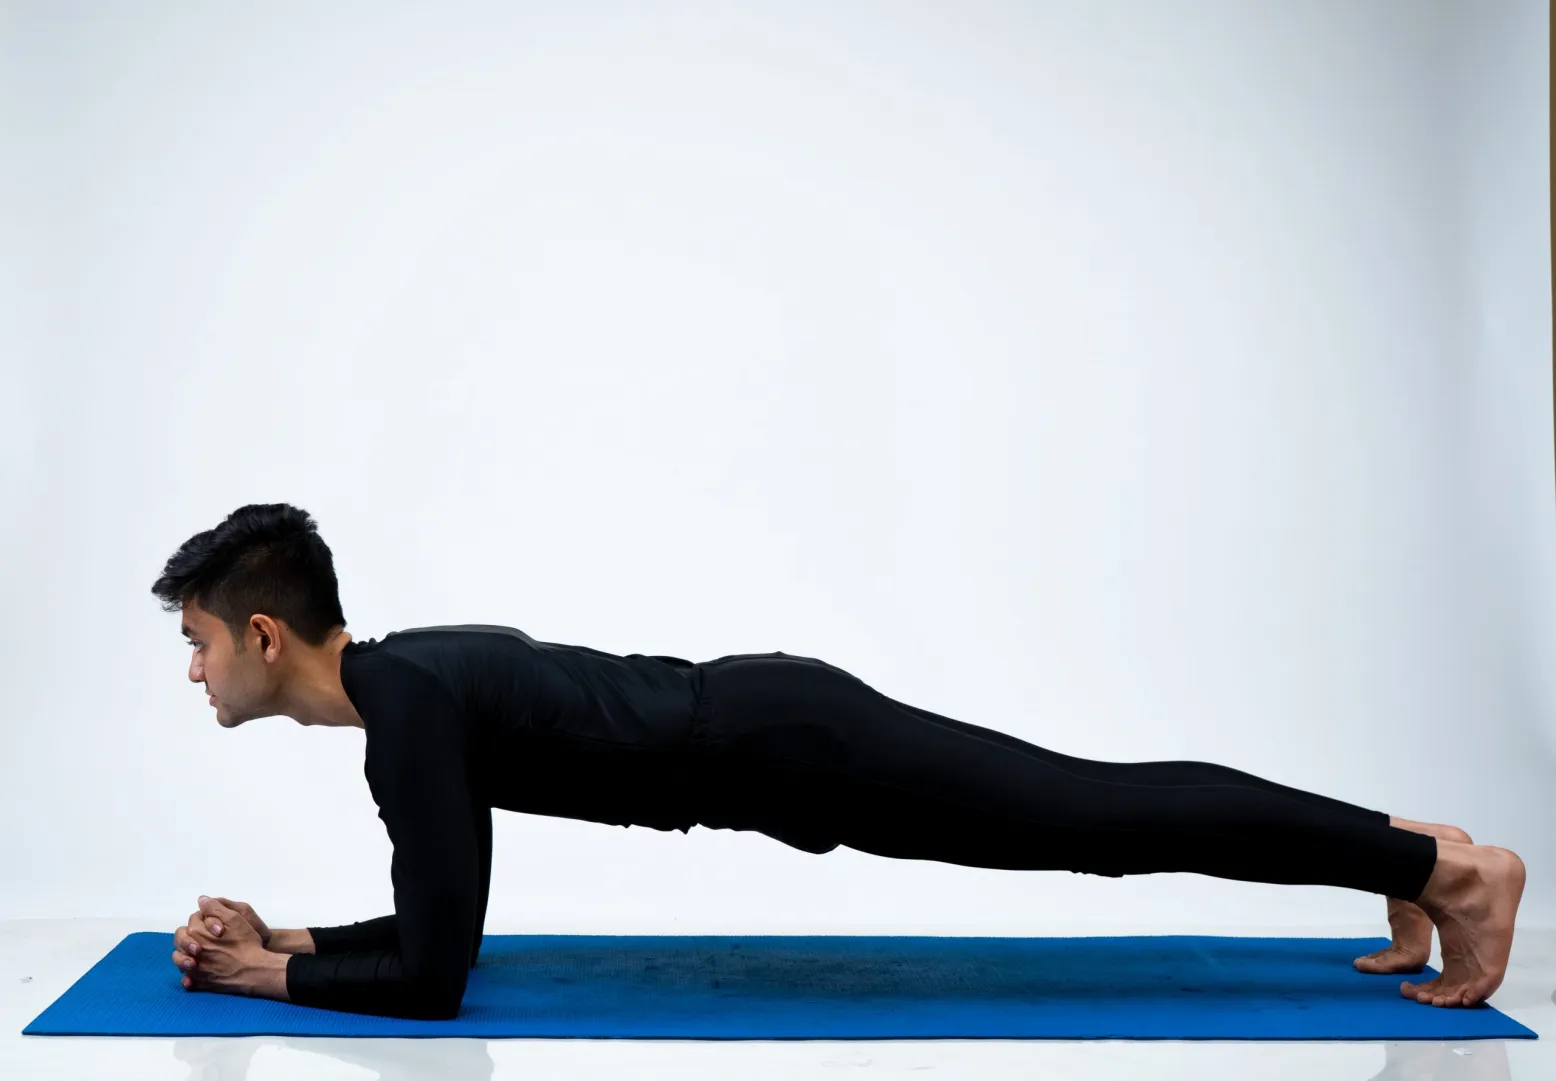 plank is one of the top 10 best exercises for building core strength